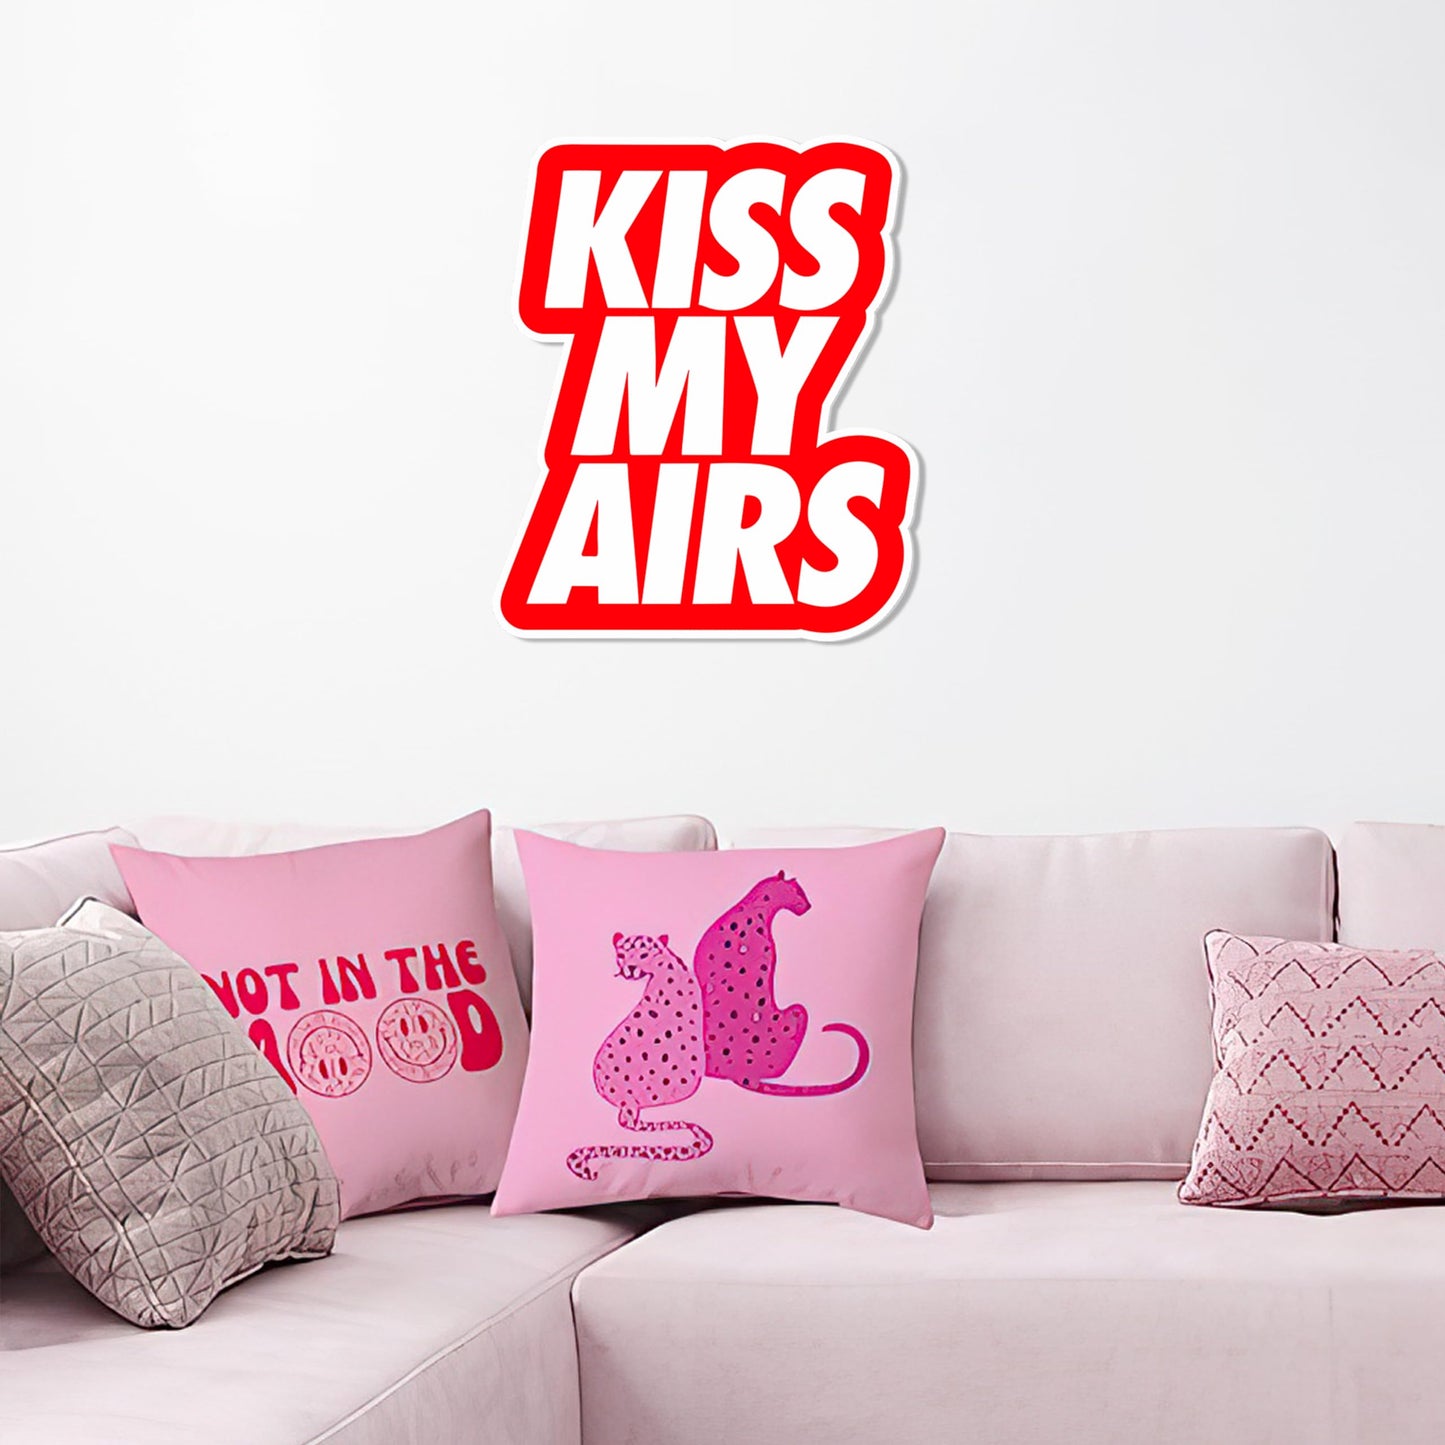 Sign Decor - Kiss My Airs (Red)